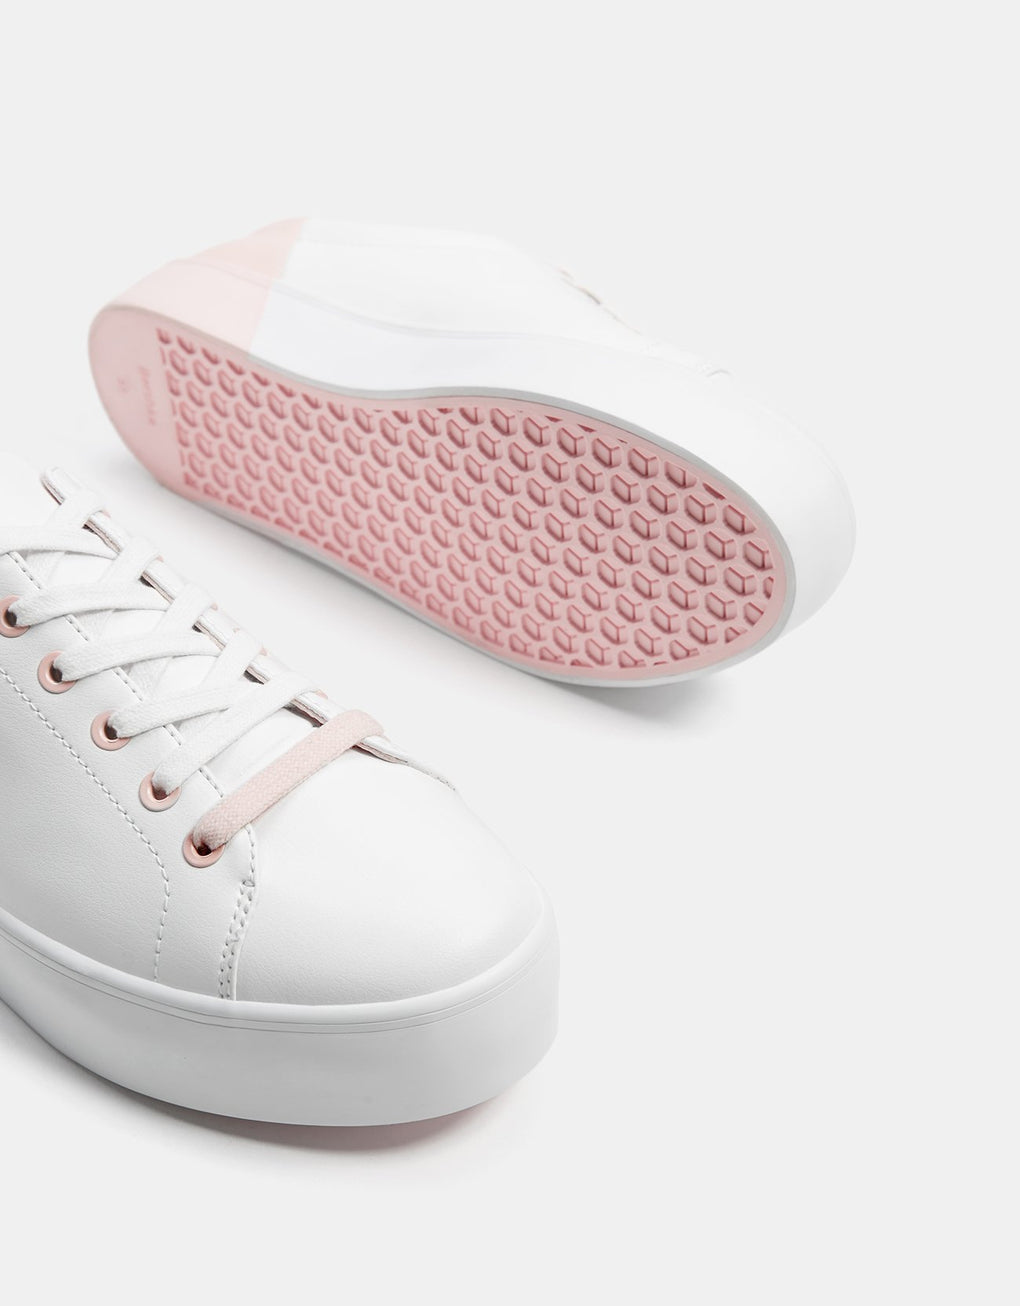 Lace-up trainers with heel detail